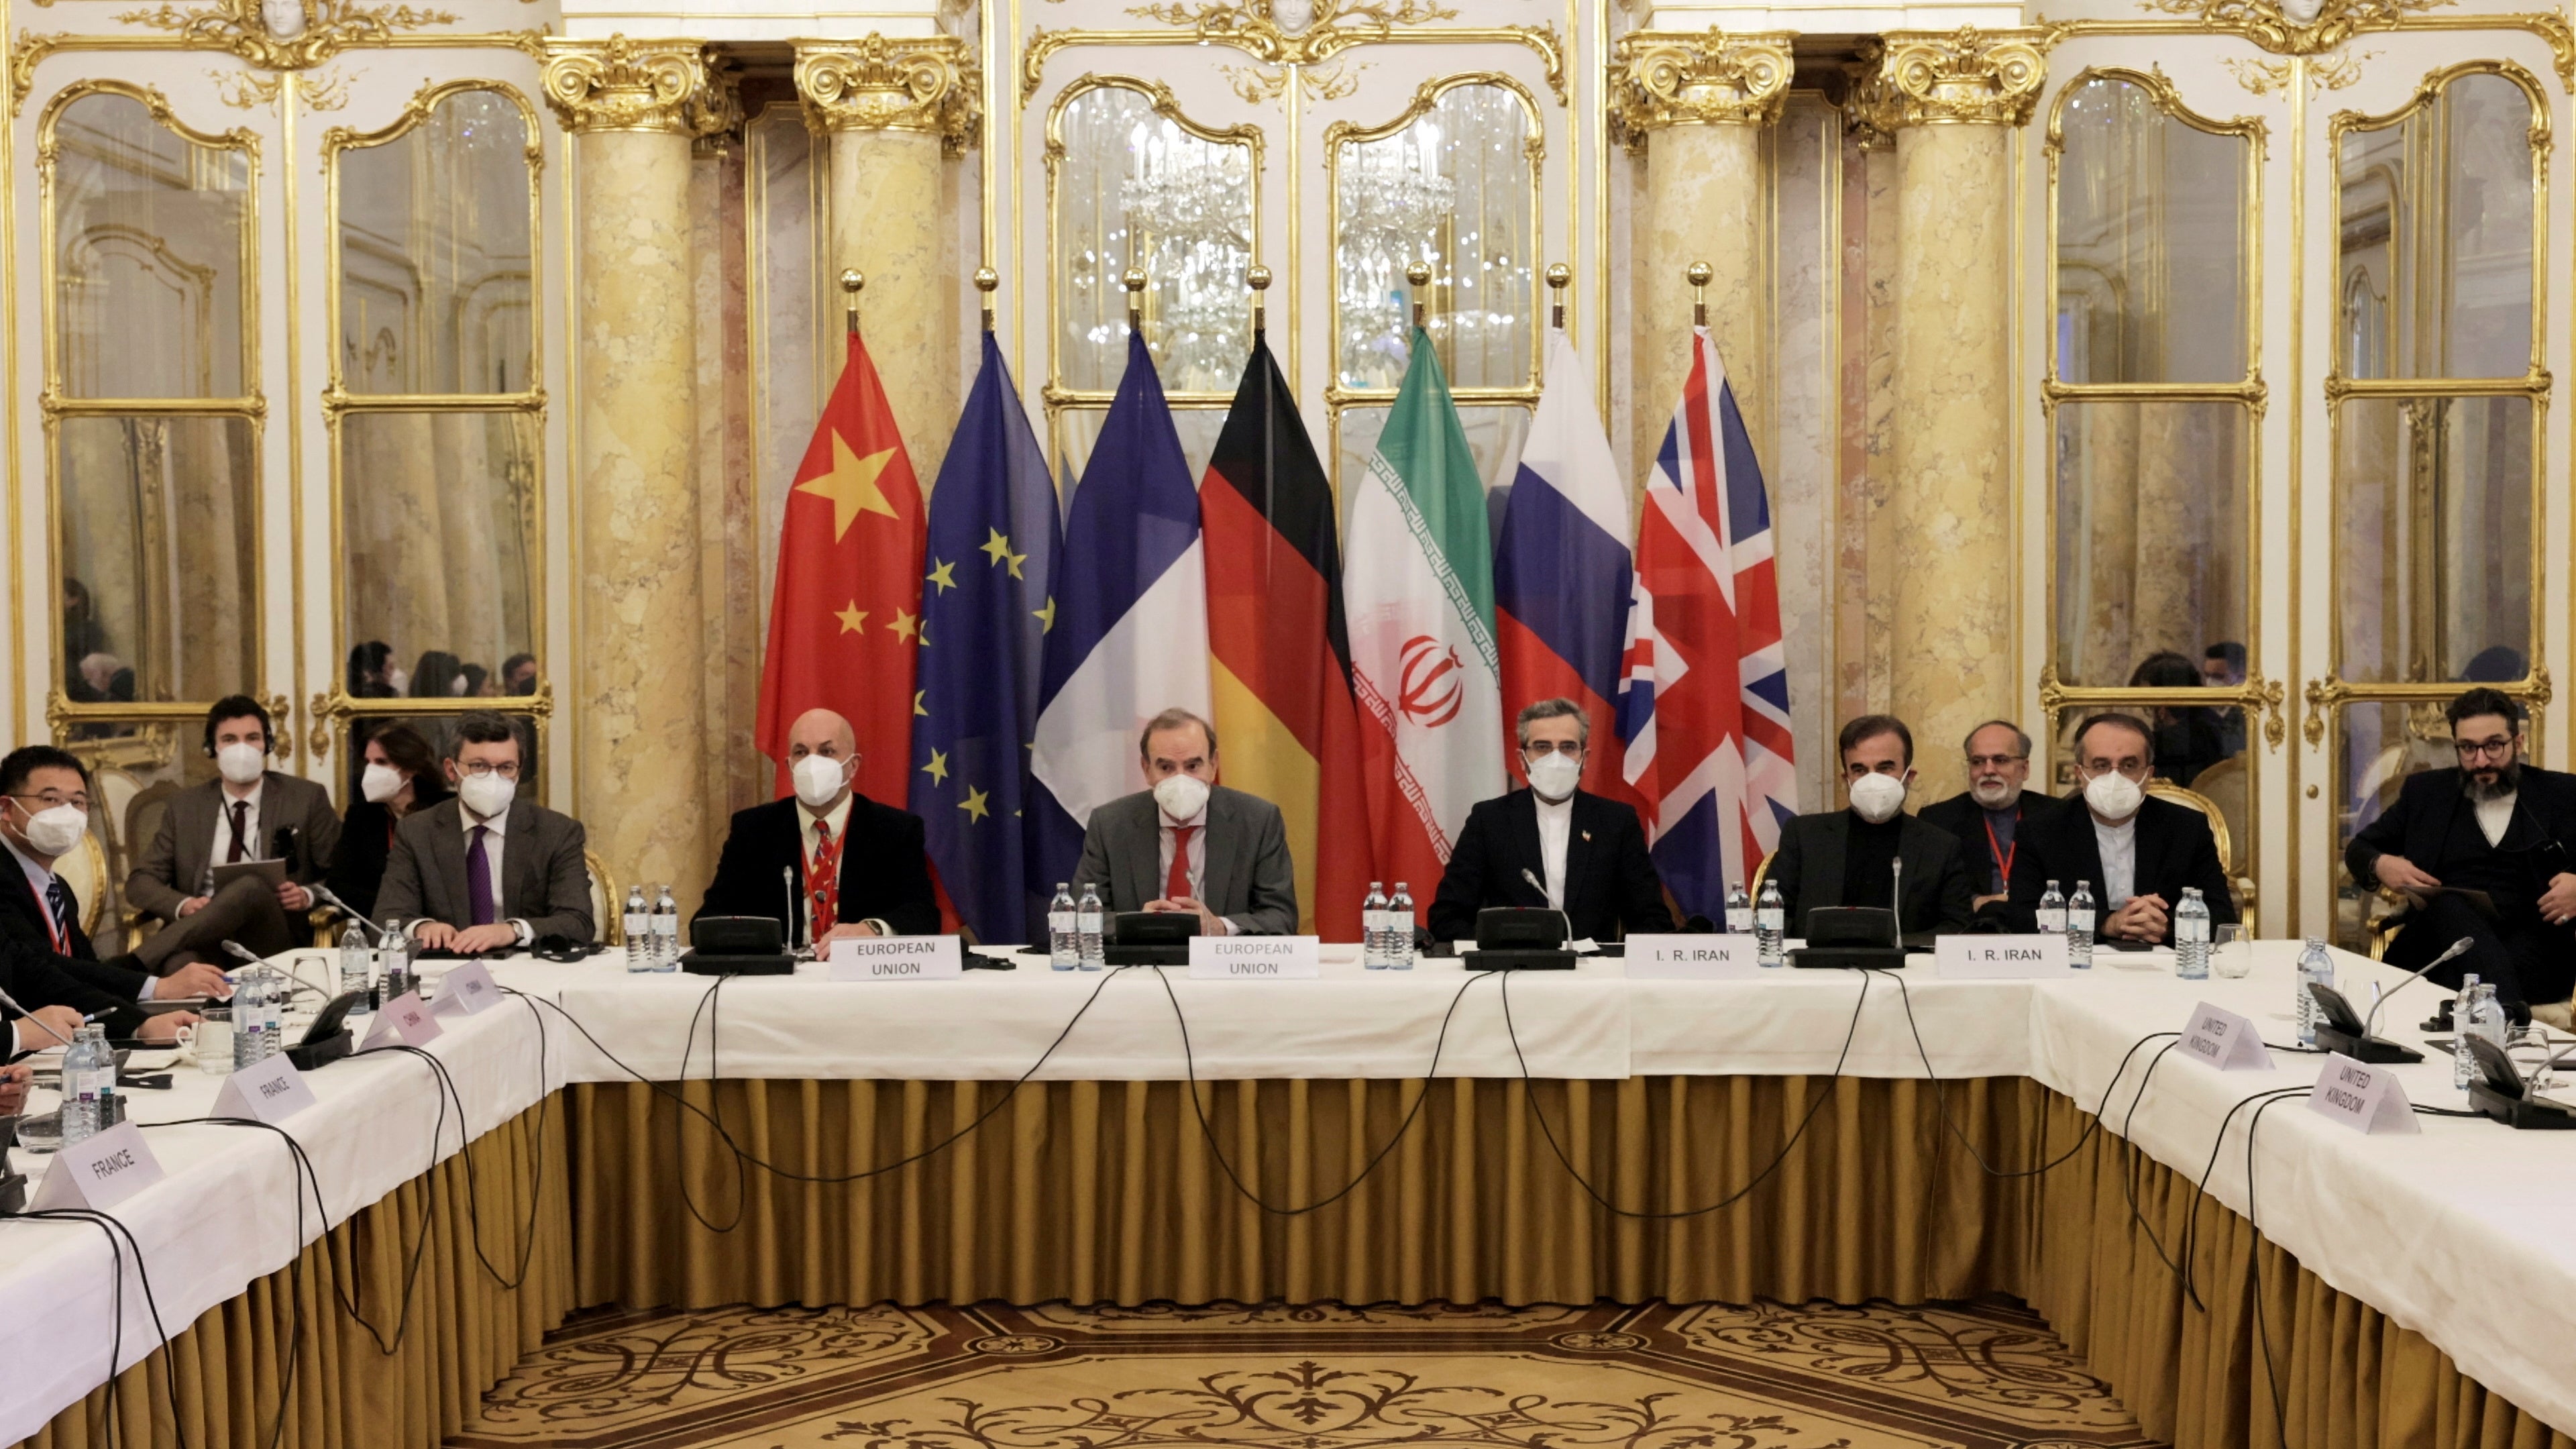 Talks between Iran and several countries including the UK began in Vienna in December 2021